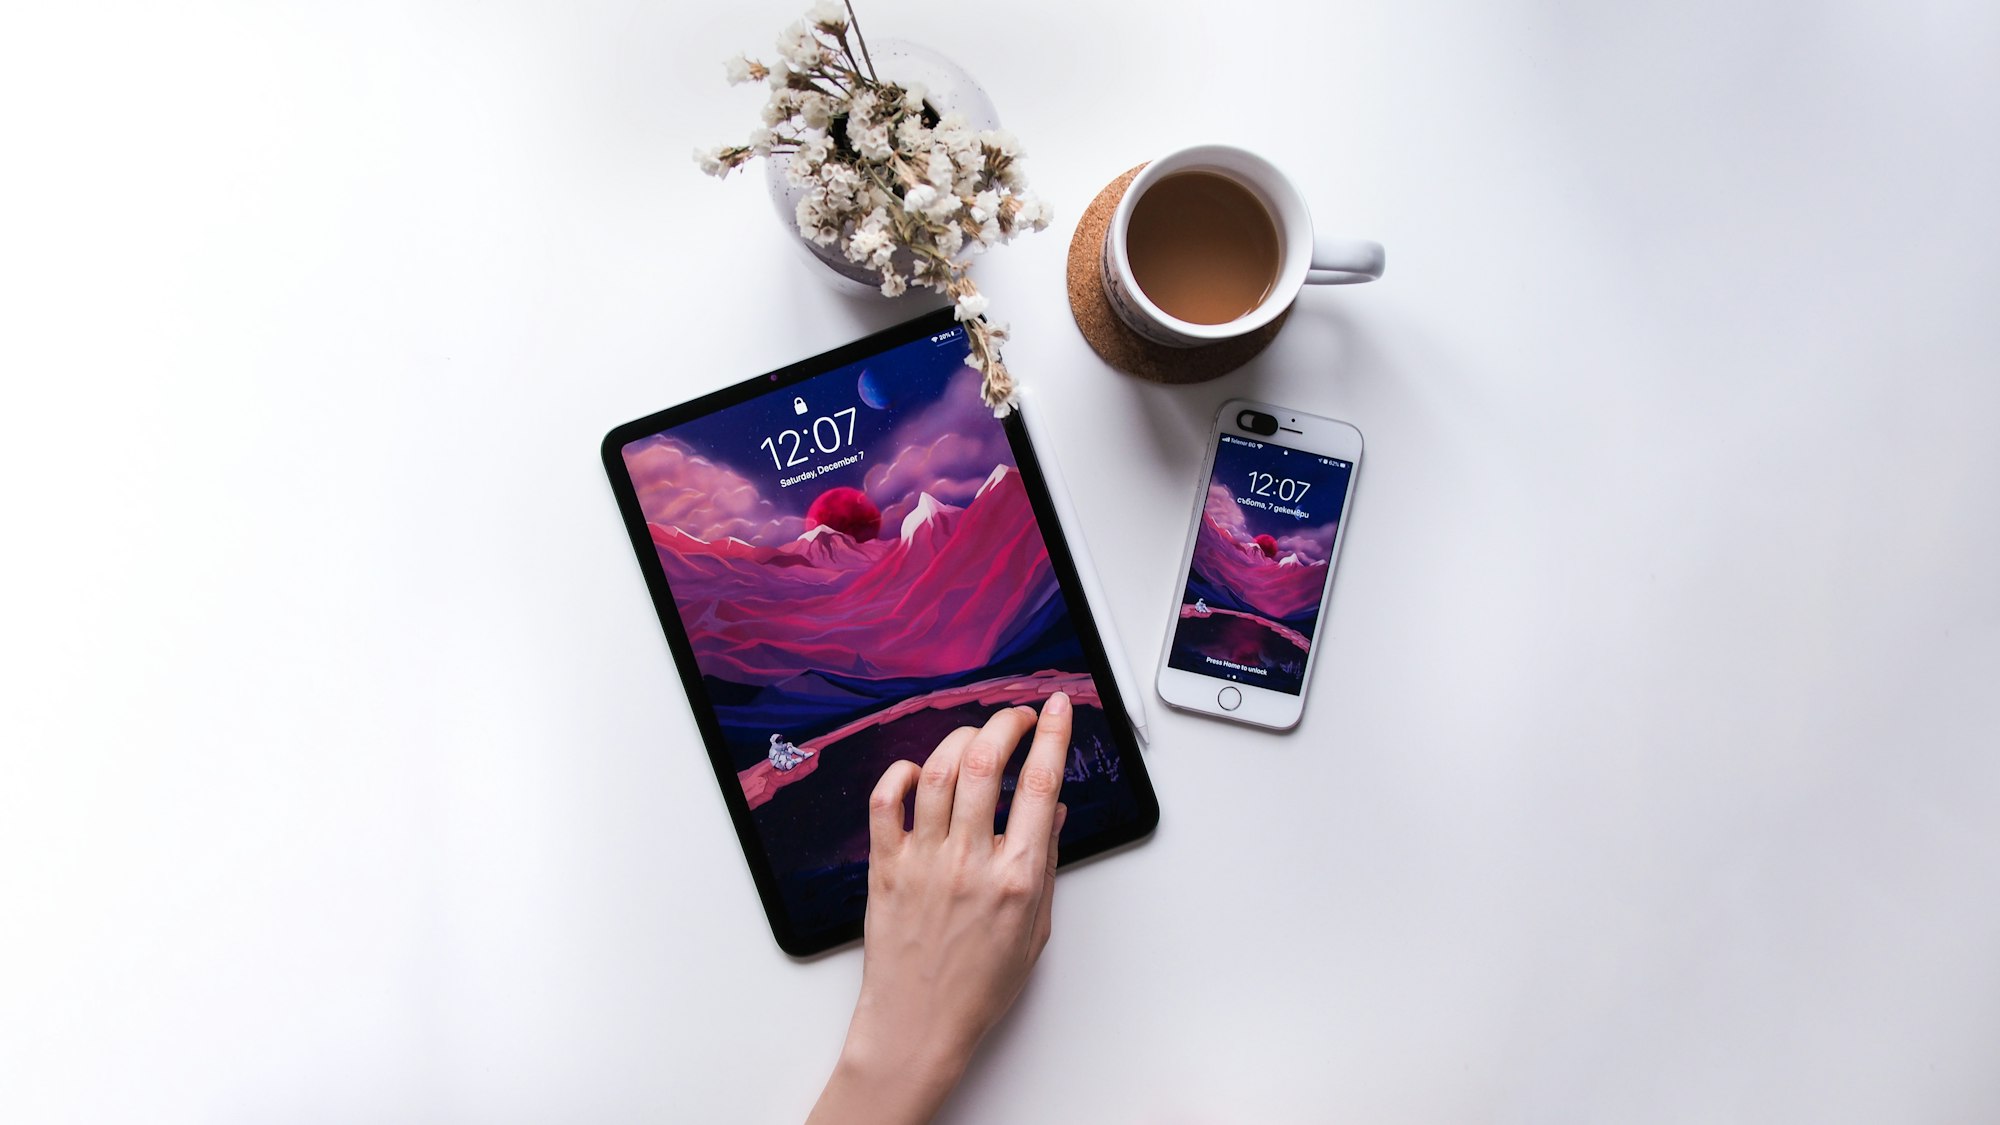 Minimal photo of tablet and phone devices with a purple wallpaper, a cup of coffee and dryed flowers in a white vase on a white clear background.